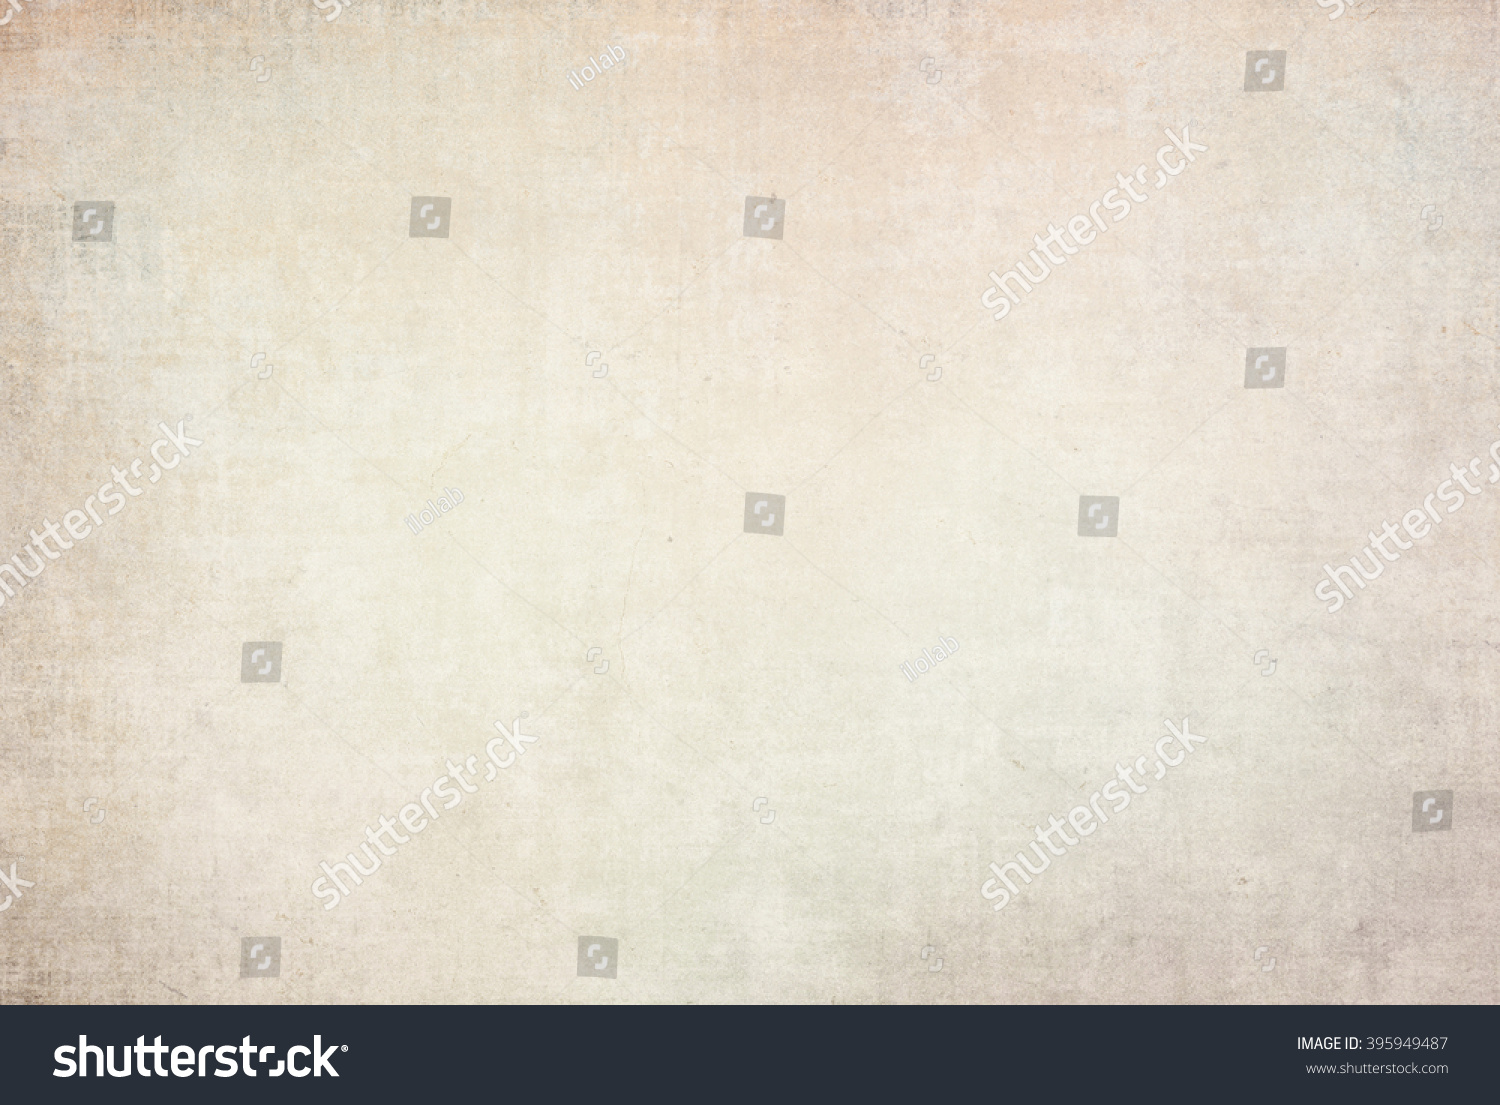 grunge textures and backgrounds - perfect with space #395949487